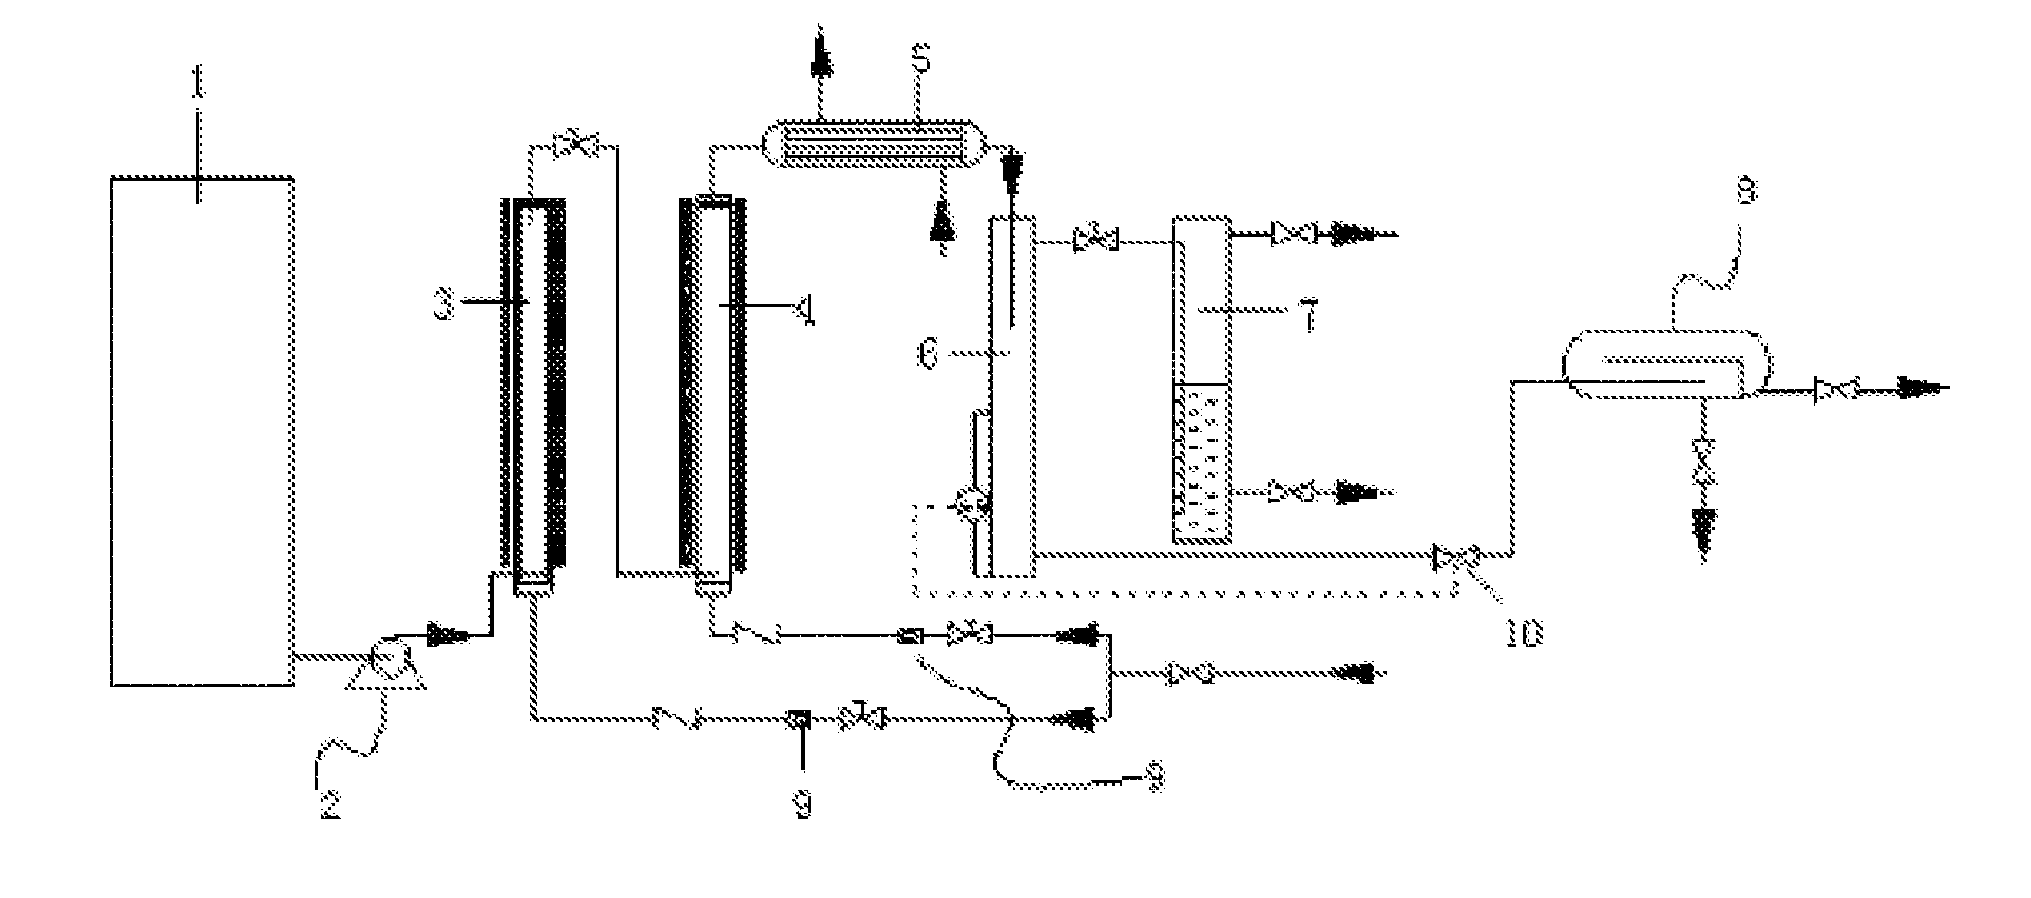 Process for hydrolysed reforming of liquous cellulose biomass to produce bio-gasoline